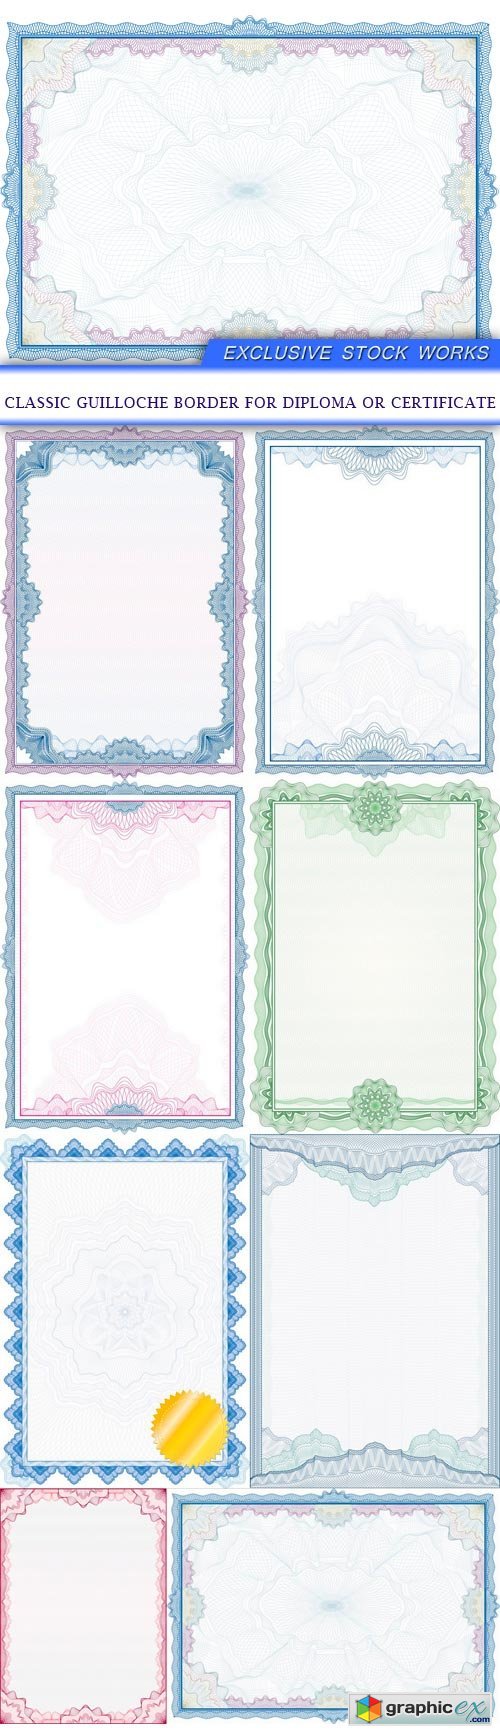 Classic guilloche border for diploma or certificate 8X EPS